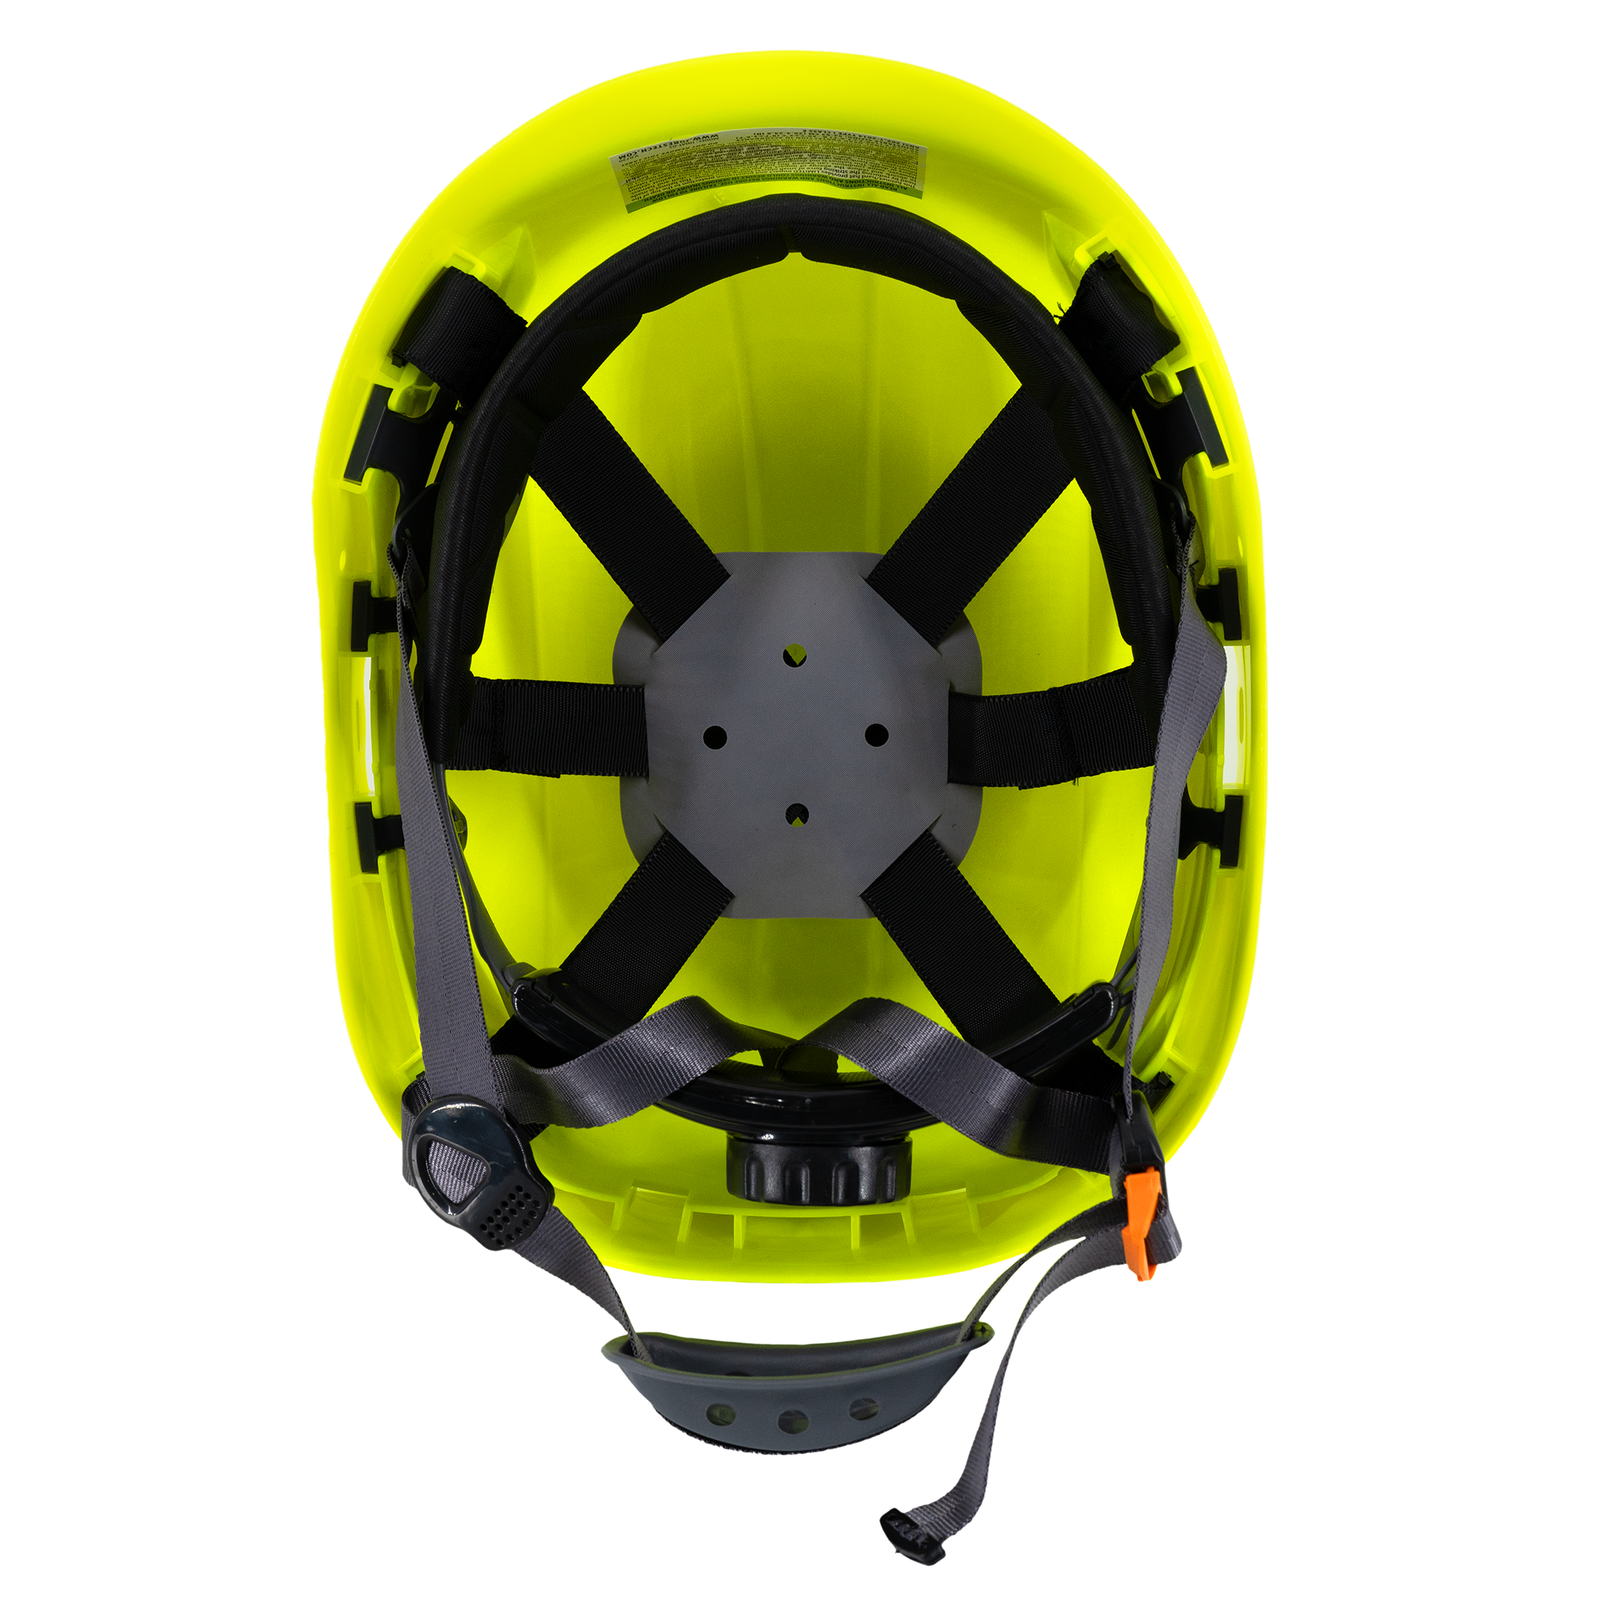 Rescue Hard Hat with Adjustable 6 Point Suspension